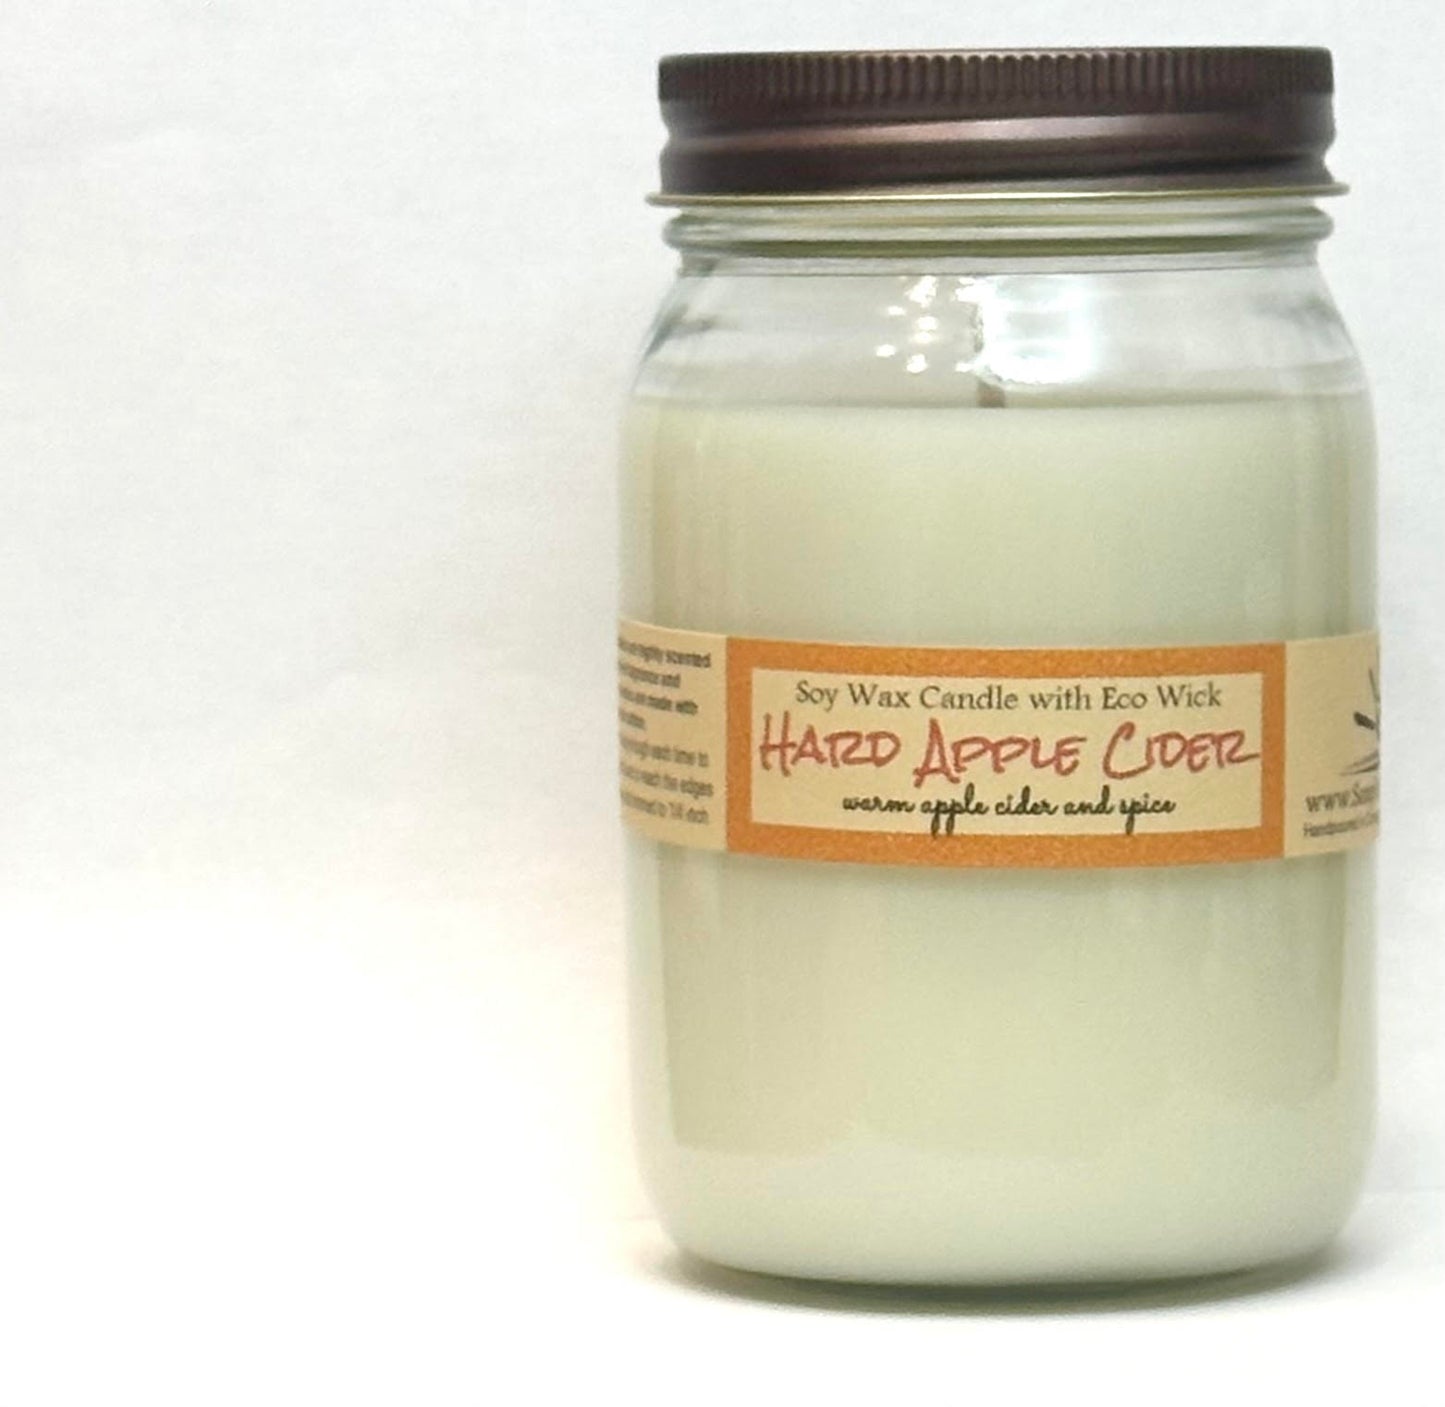 Hard Apple Cider Soy Wax Candle